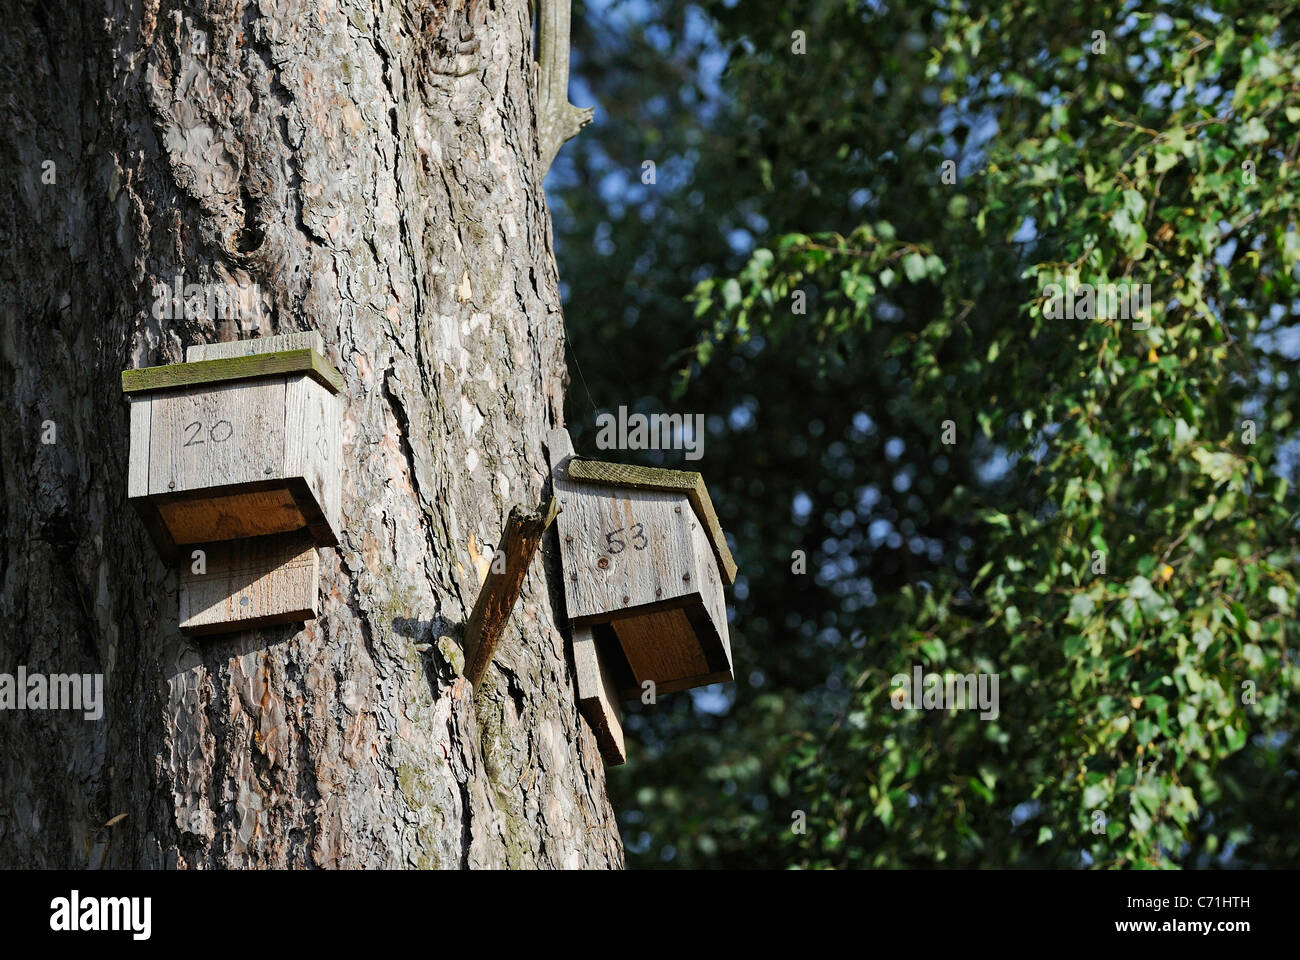 Two wooden bat boxes nailed to the trunk of a tree providing a roost for woodland bats. Stock Photo